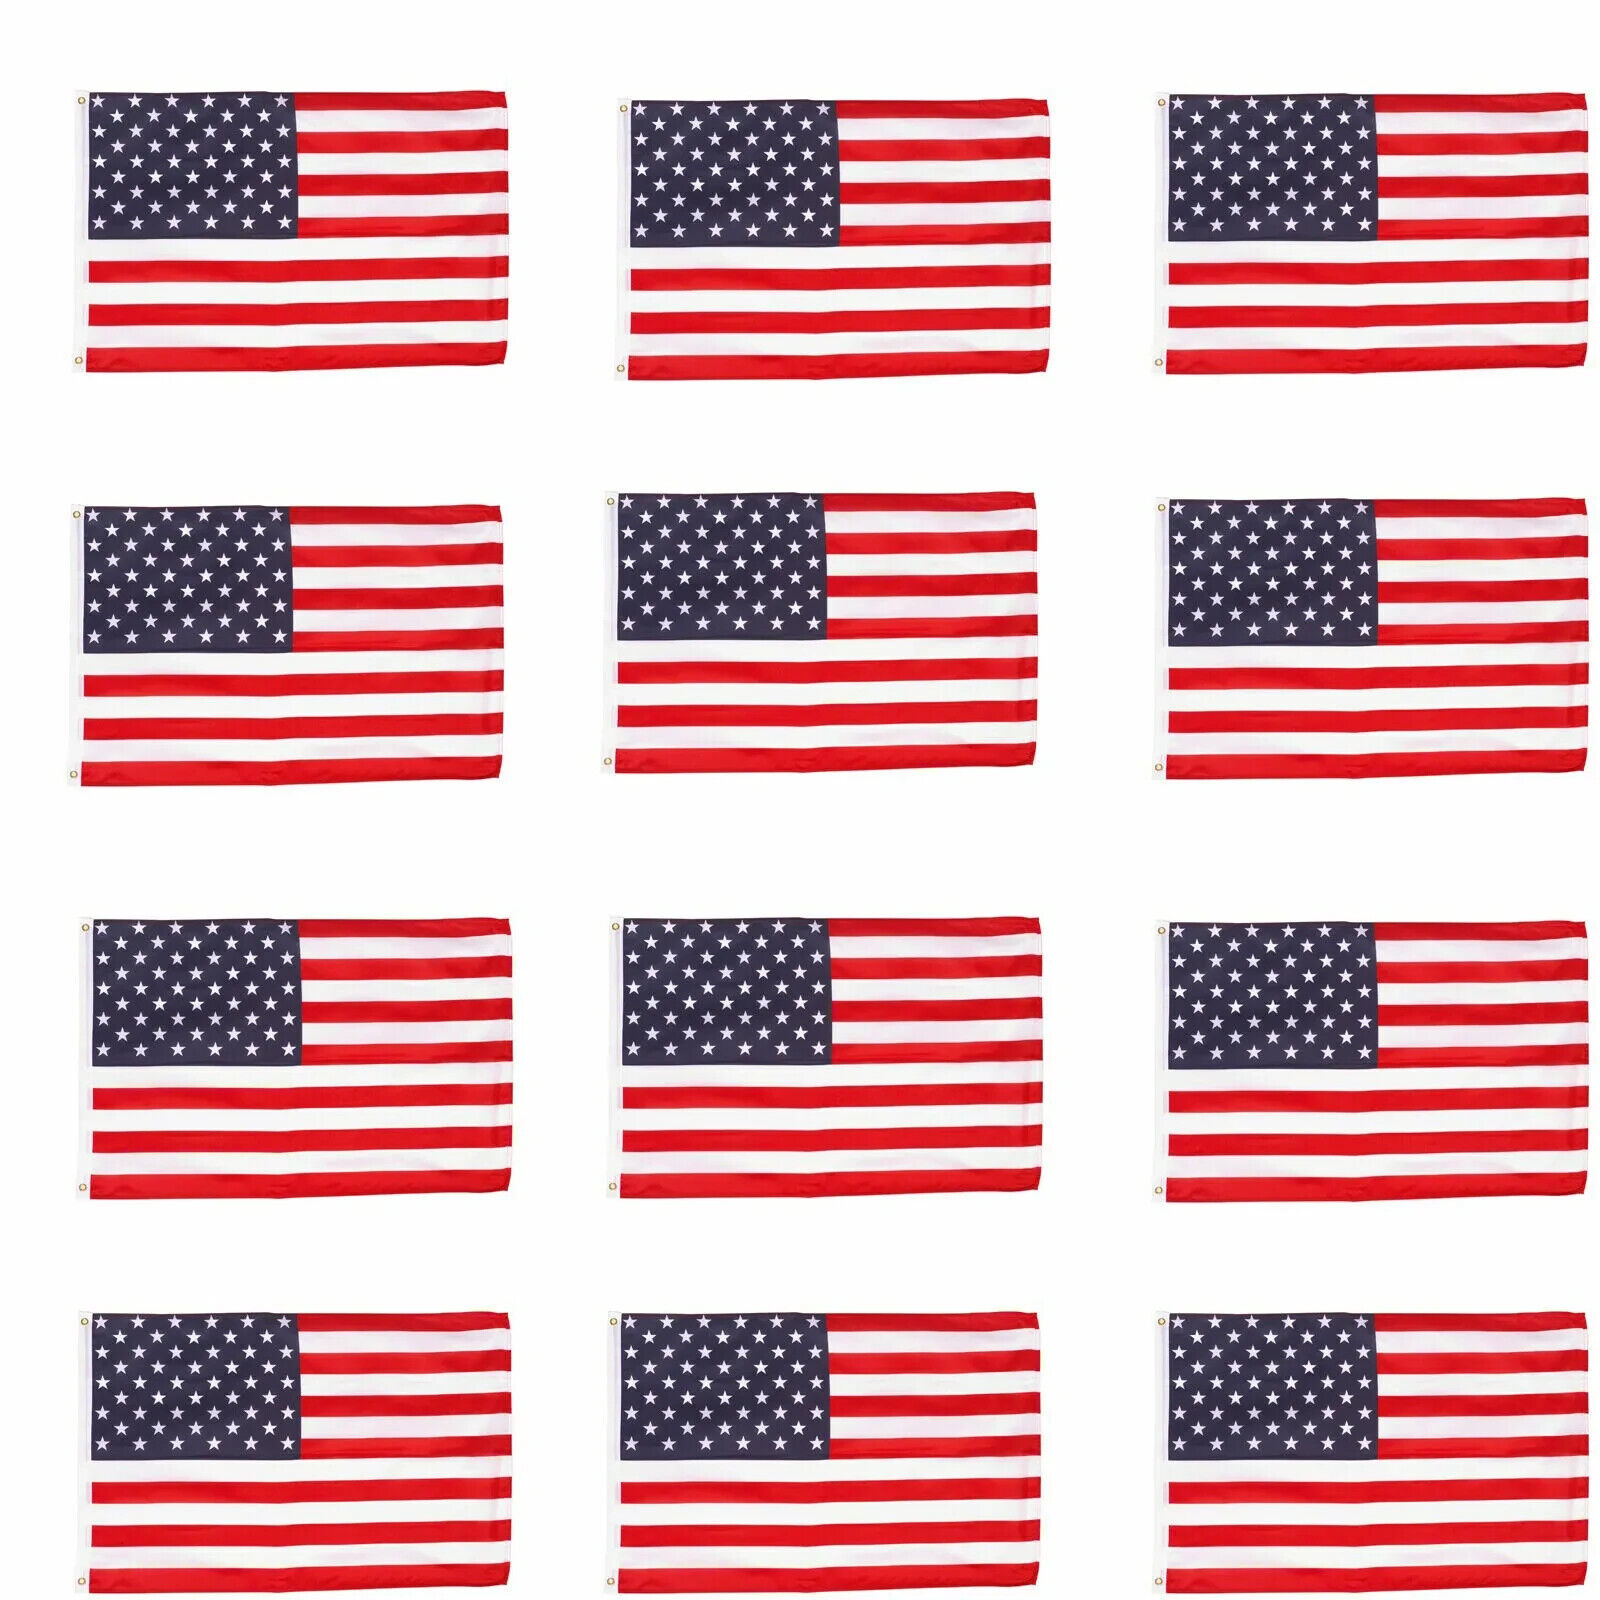 Wholesale lot 12 2' x 3' ft. USA US American Flag Stars Grommets United States